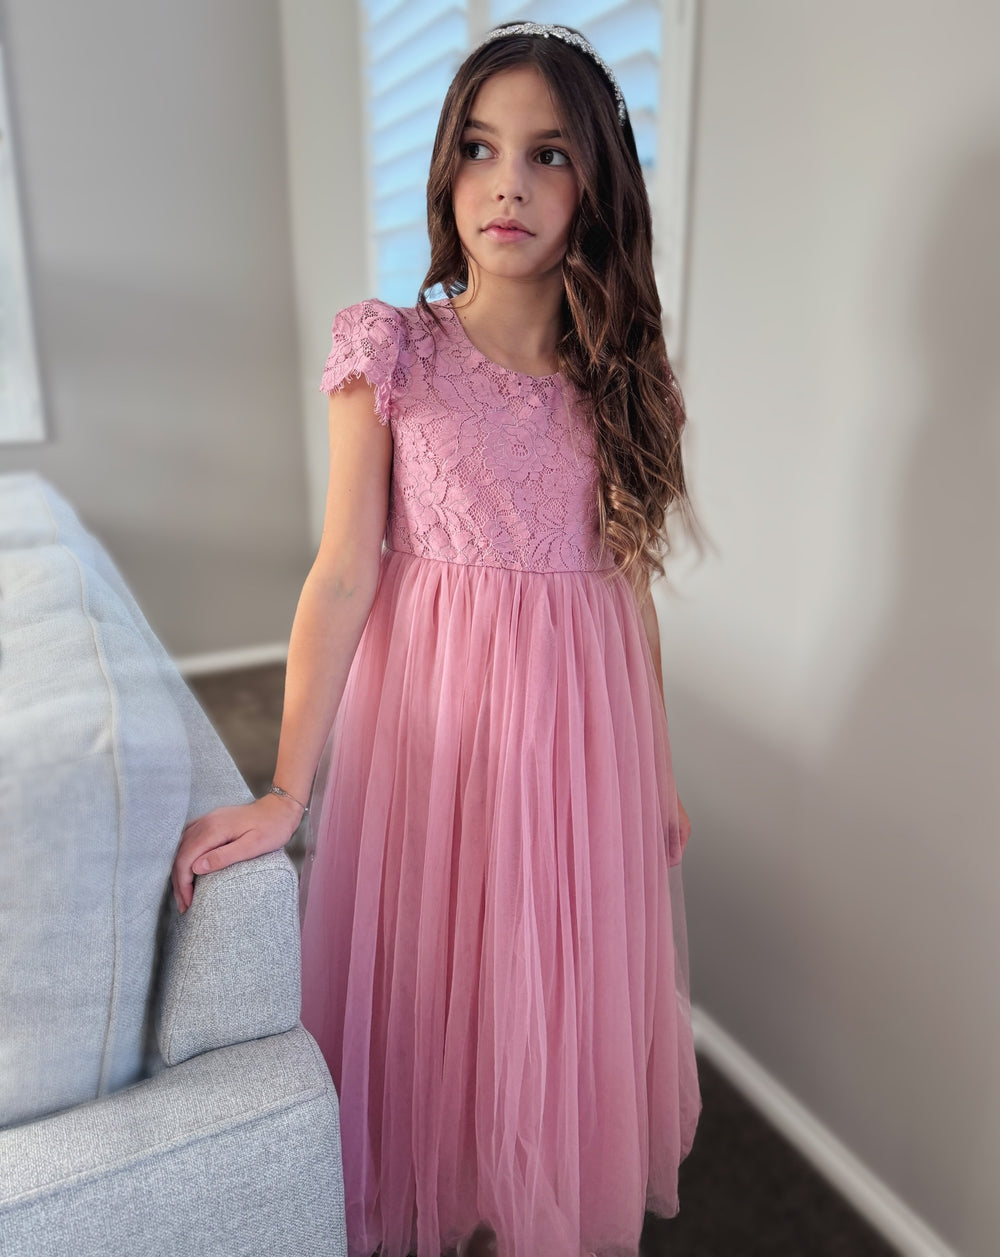 Serenade Girls Dusty Rose Lace Dress - New Arrivals